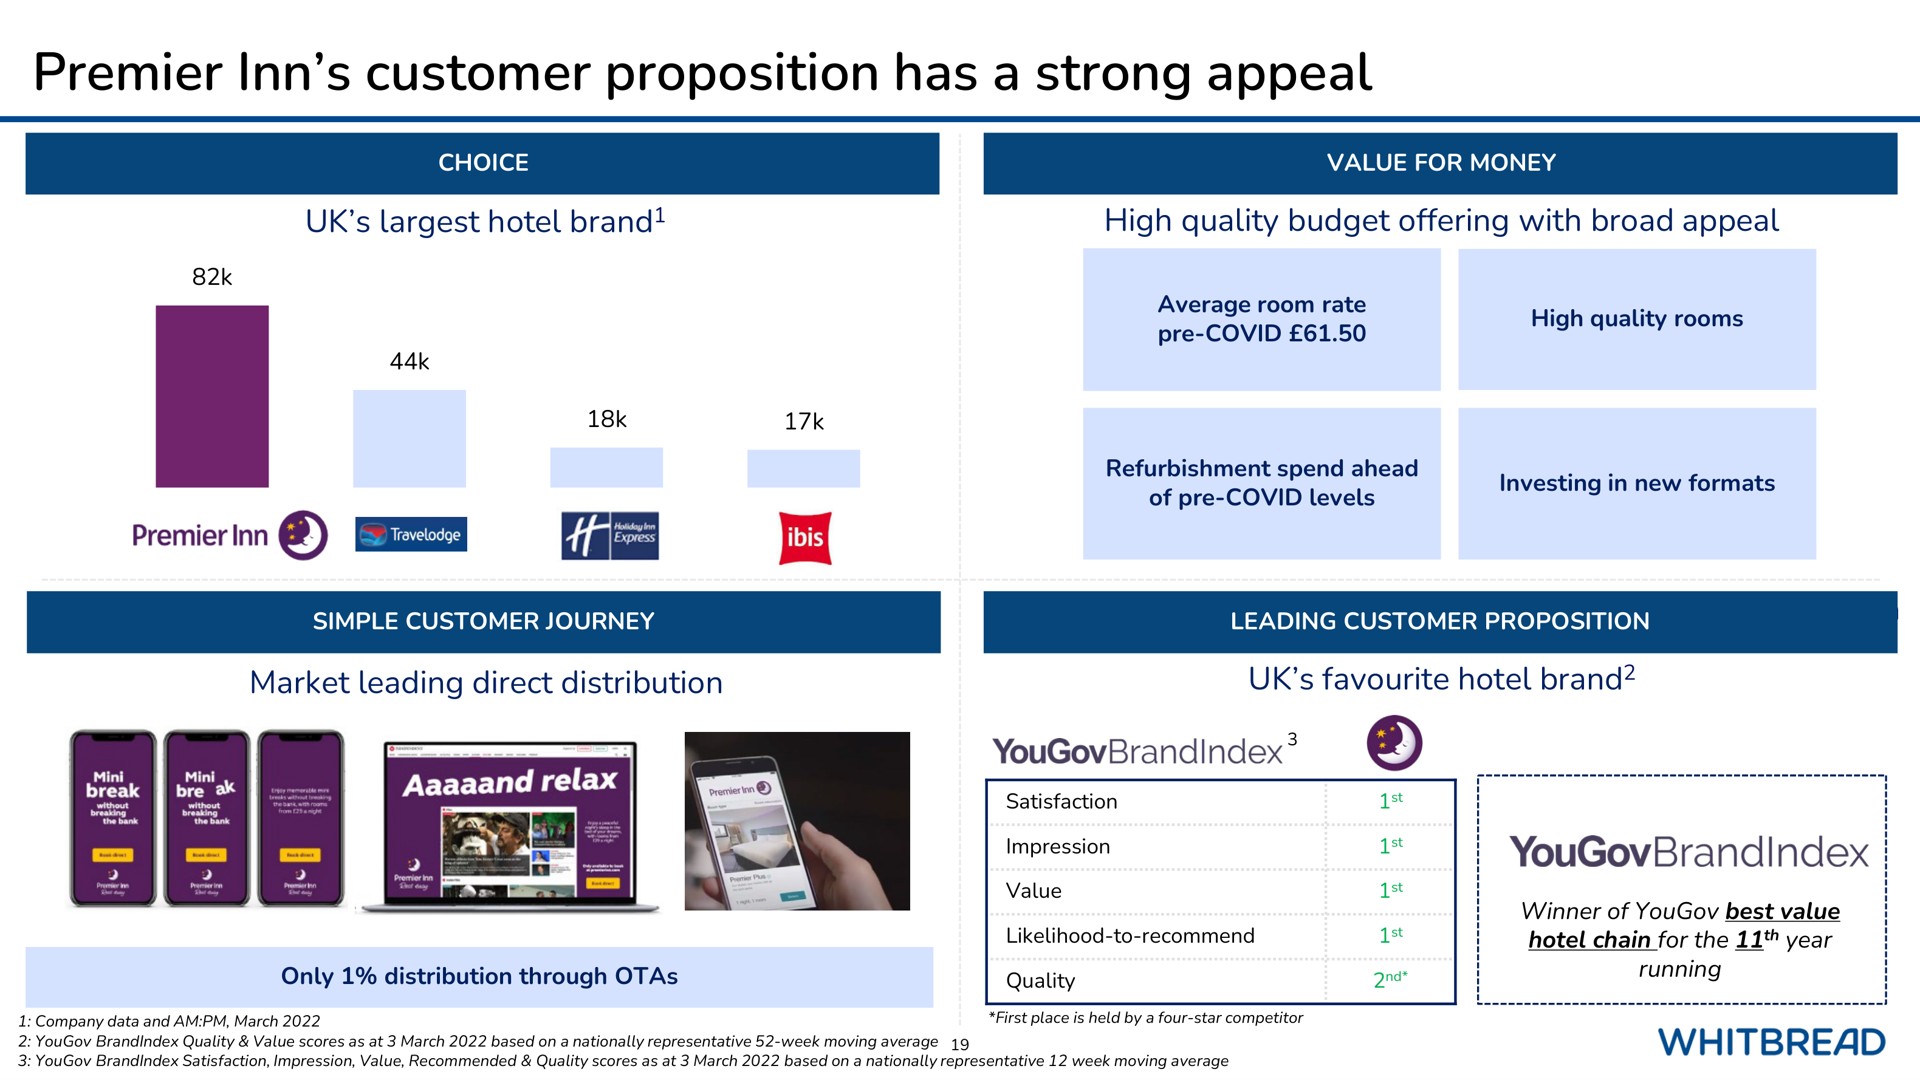 premier inn customer proposition has a strong appeal covid no mos a i tole in leading | Whitebread